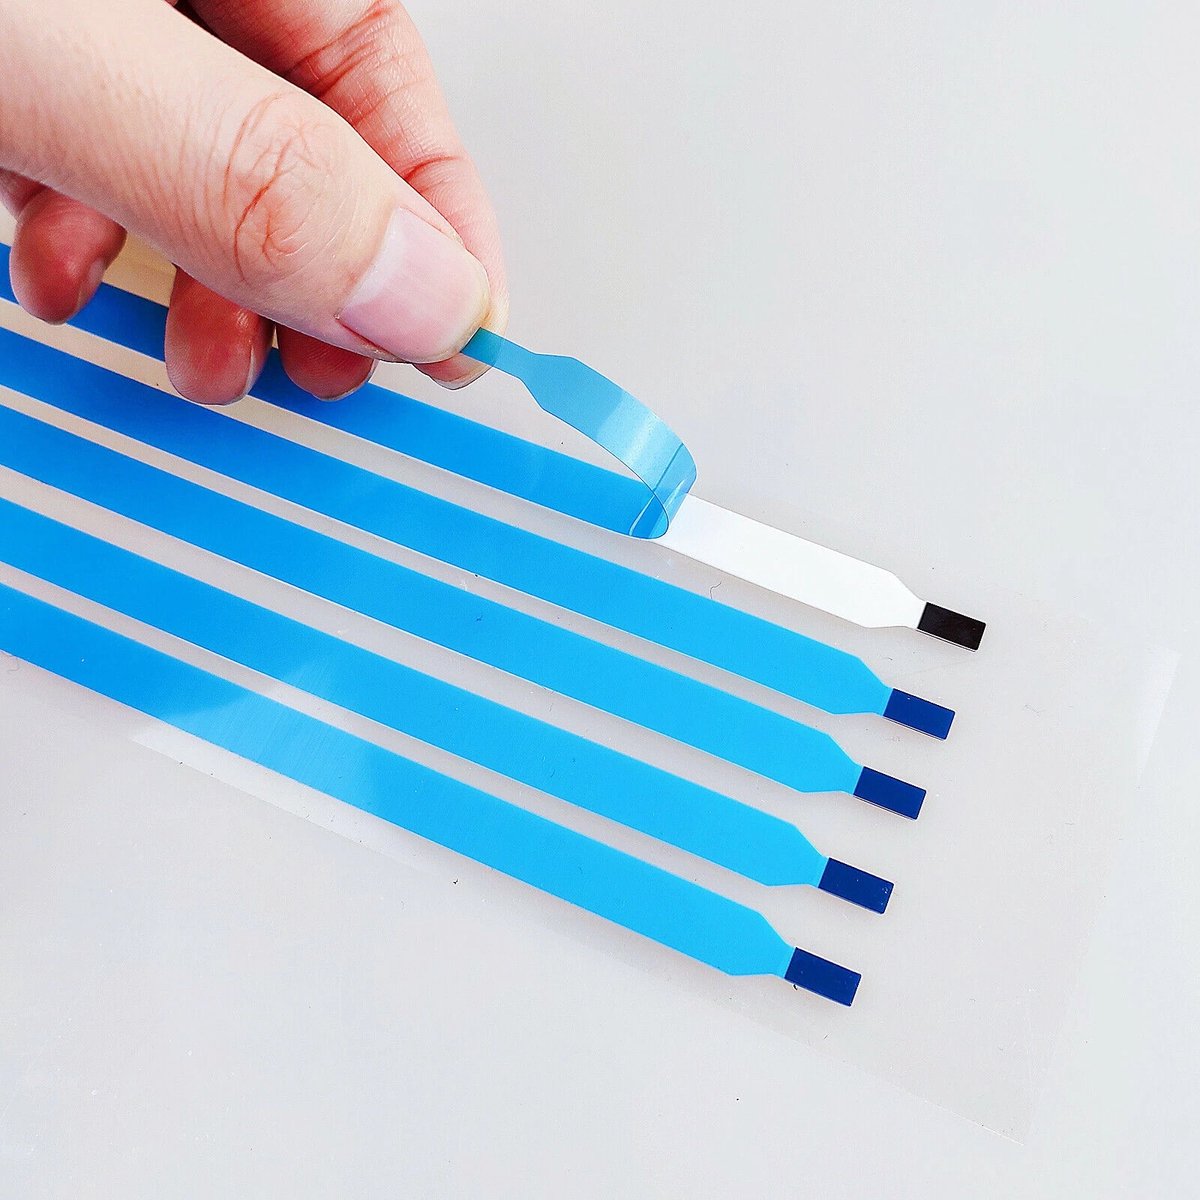 Adhesive strip removable for laptop screens that need to be glued